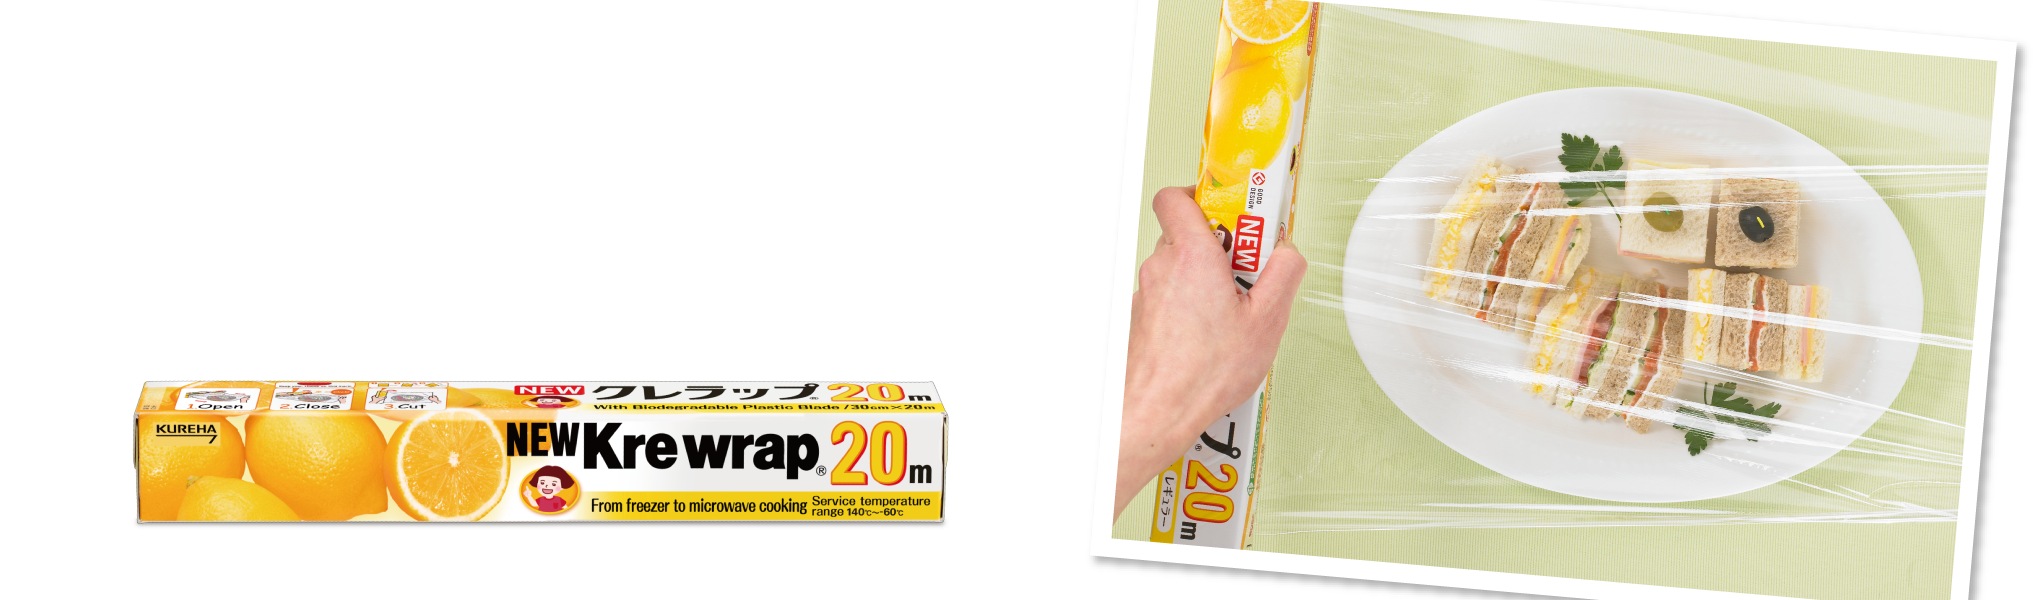 Japan's first household cling wrap NEW Krewrap